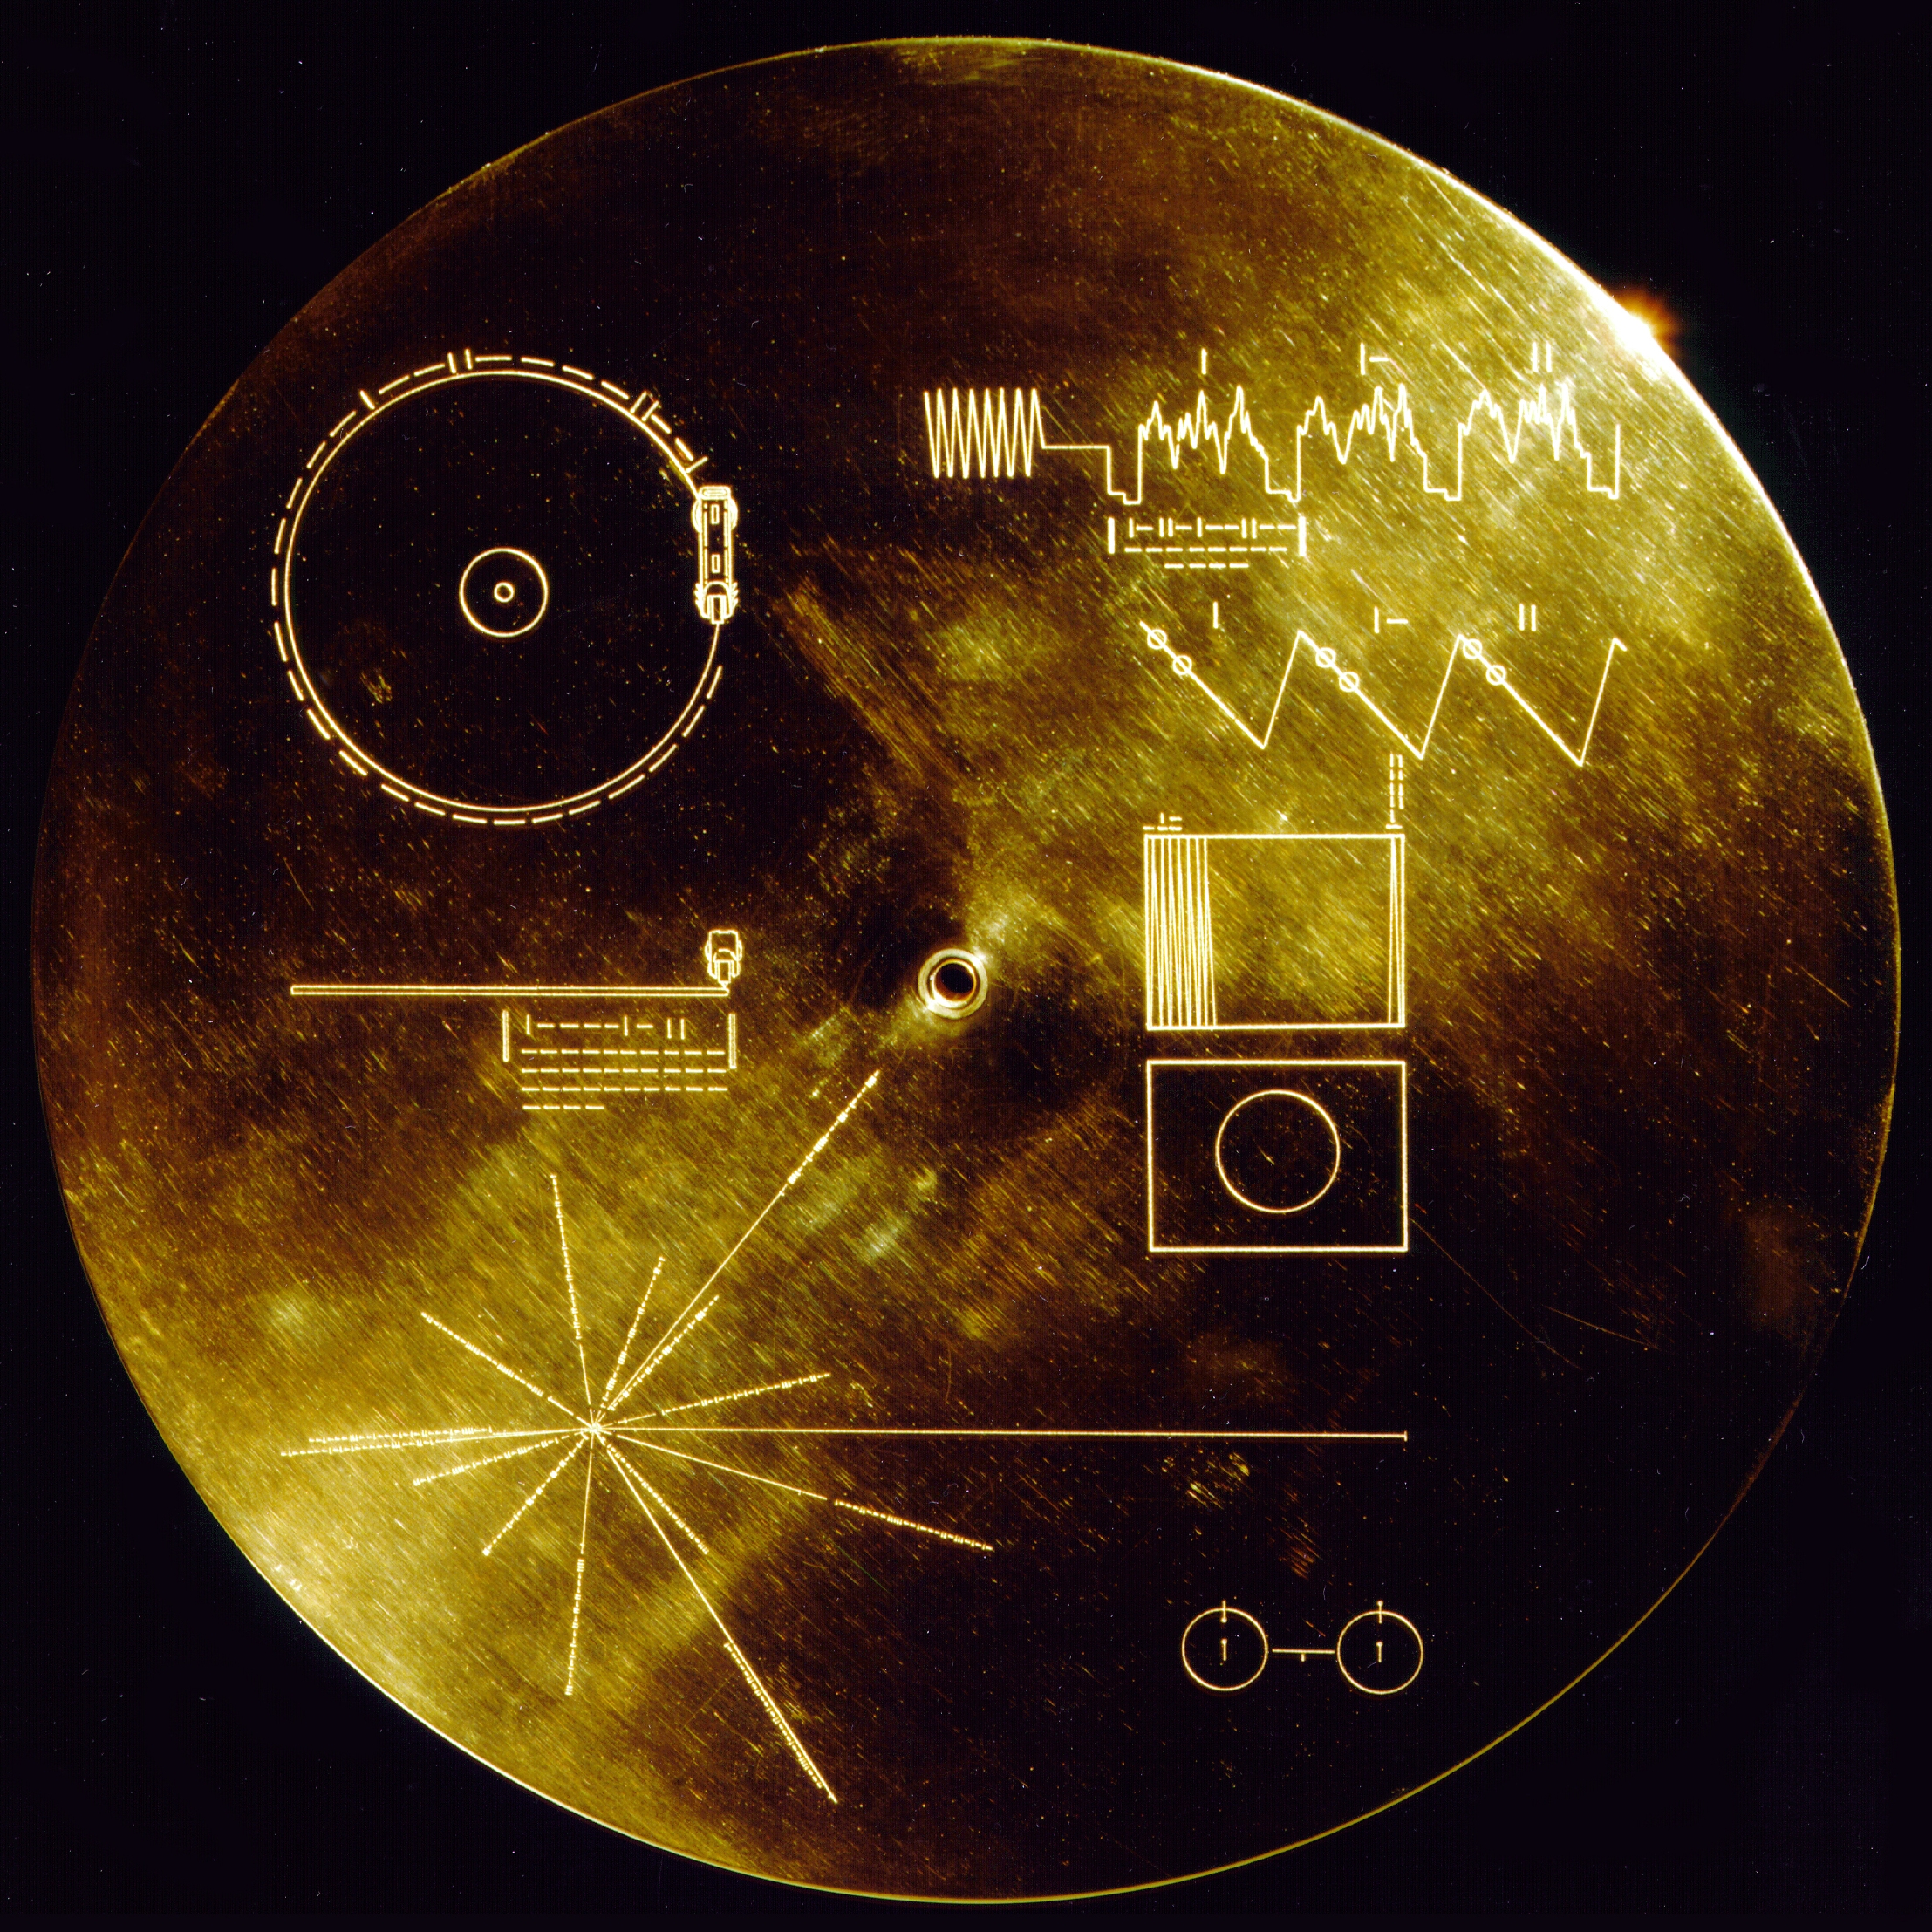 The backside of the Sounds of Earth record, engraved with nonverbal instructions and an abstract map of the solar system.